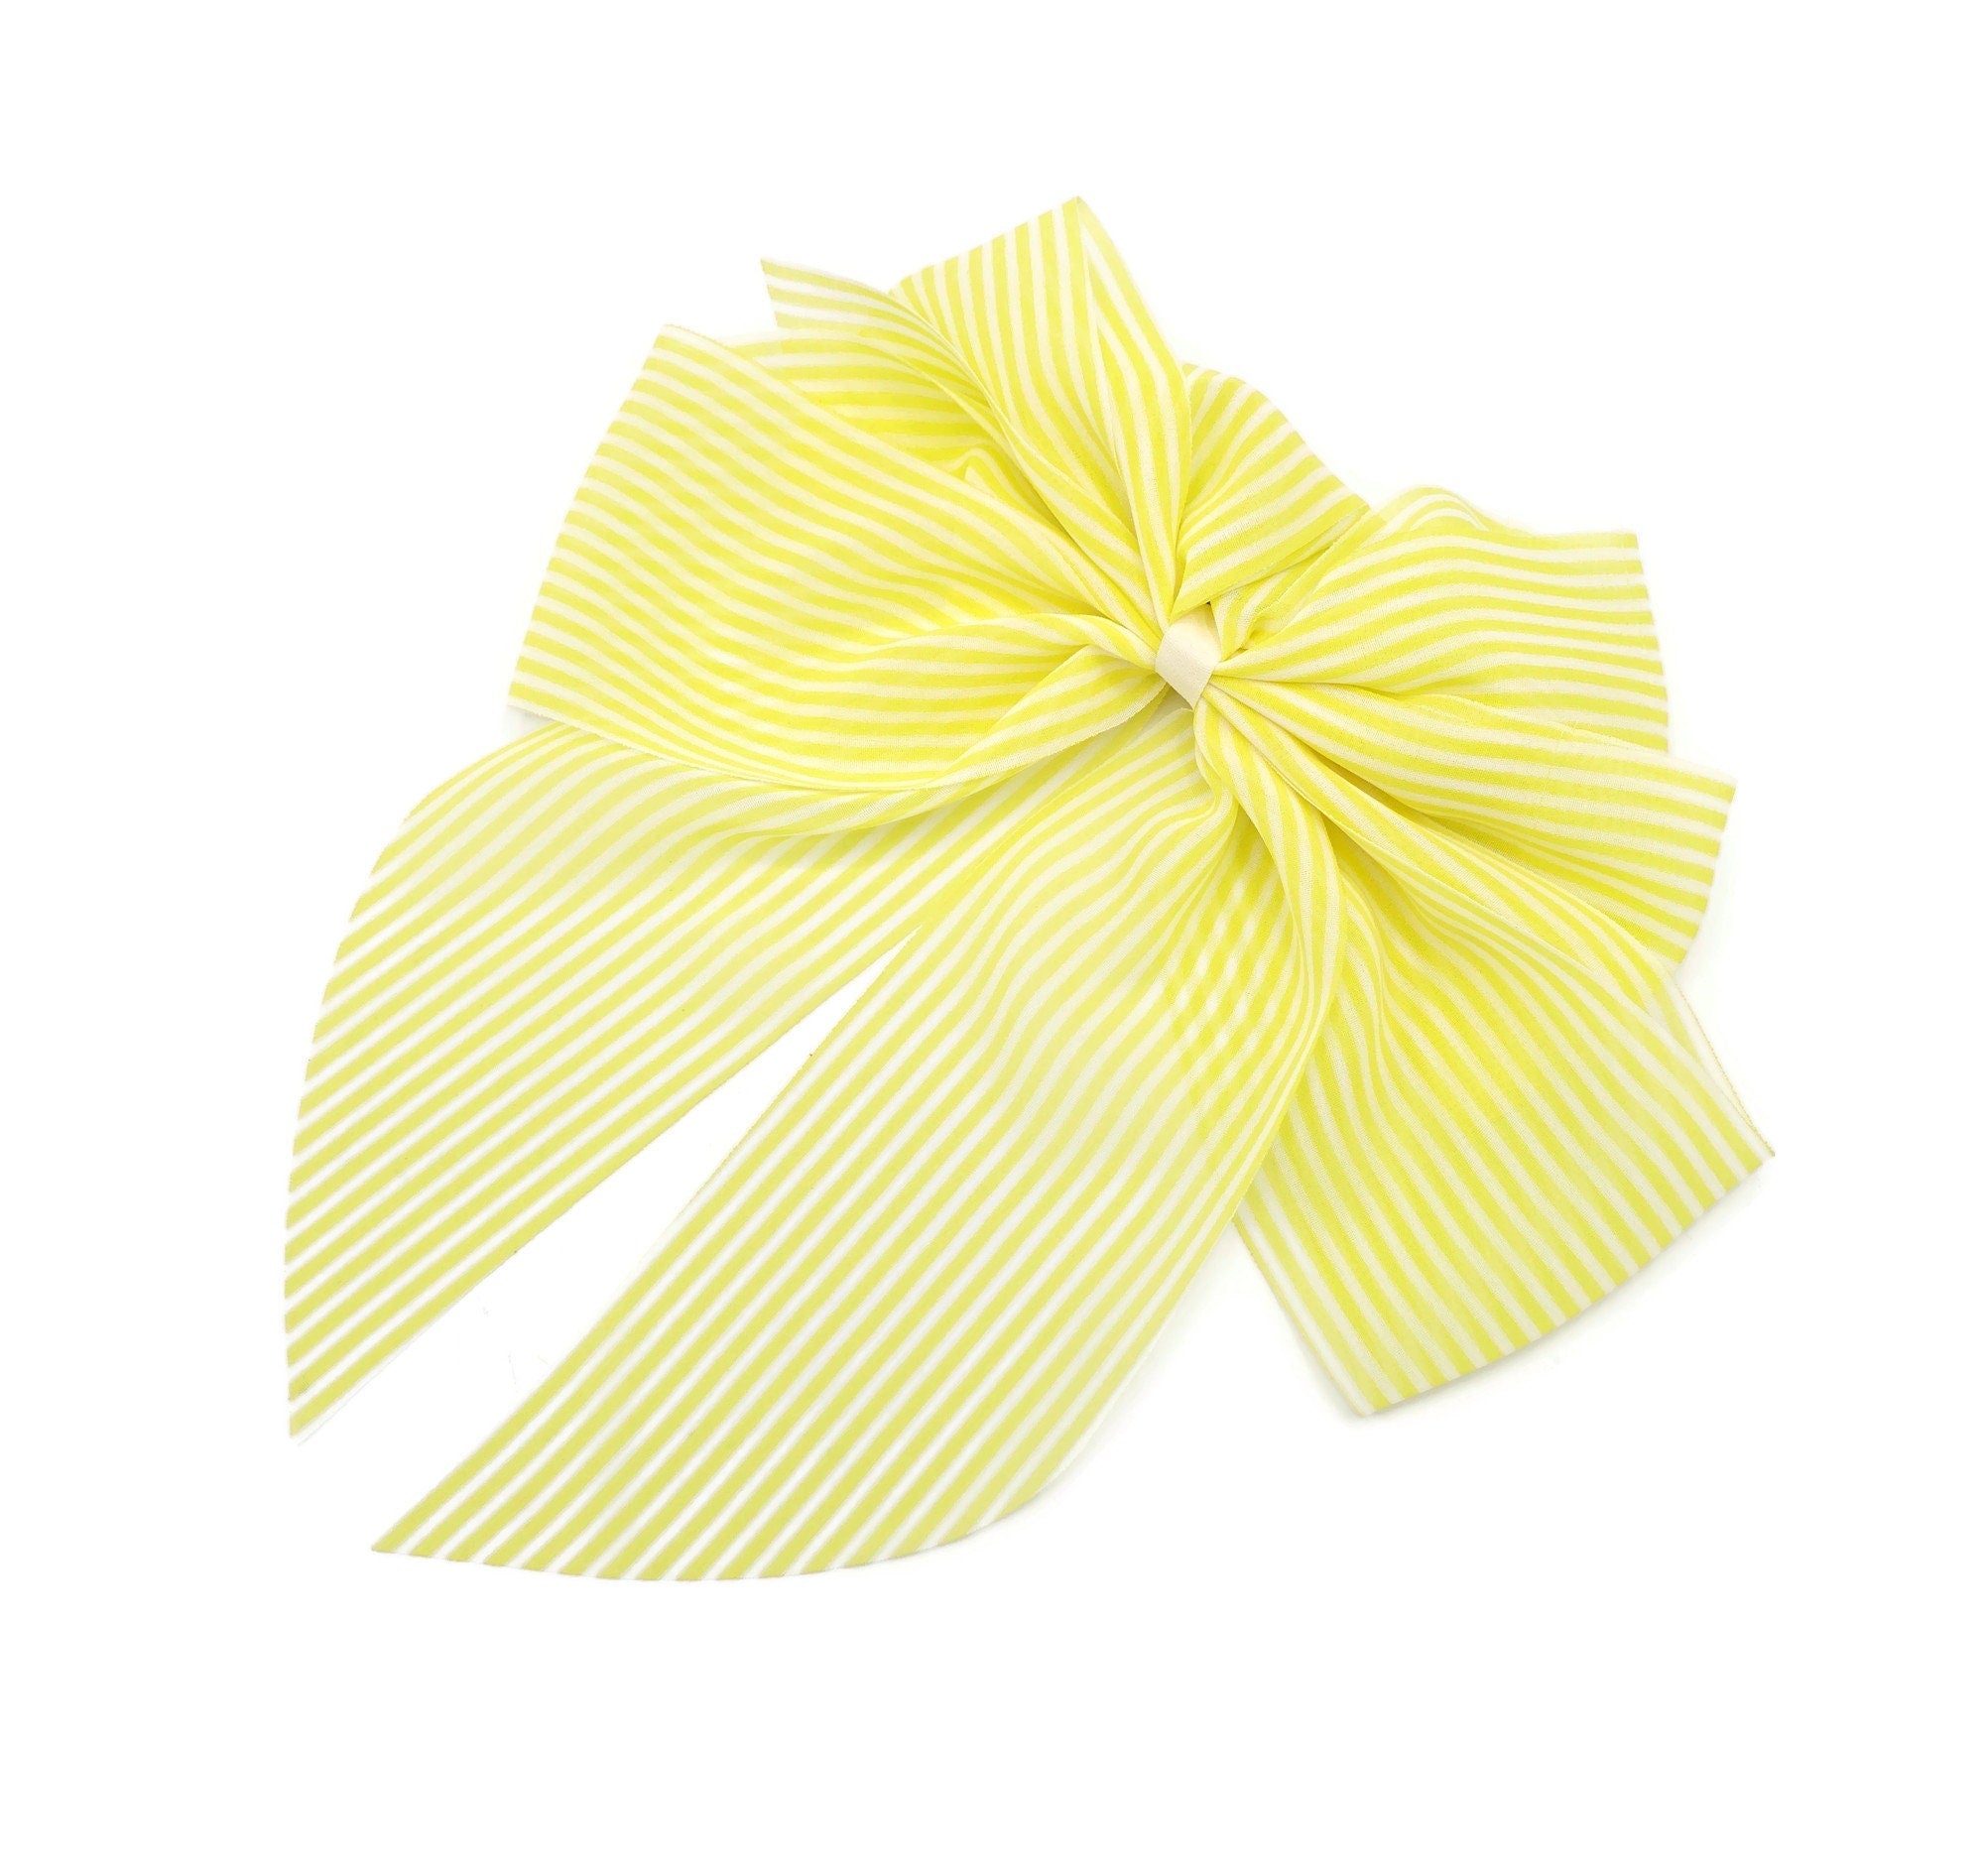 VeryShine Barrette (Bow) Yellow narrow stripe hair bow layered style tail hair accessory for women